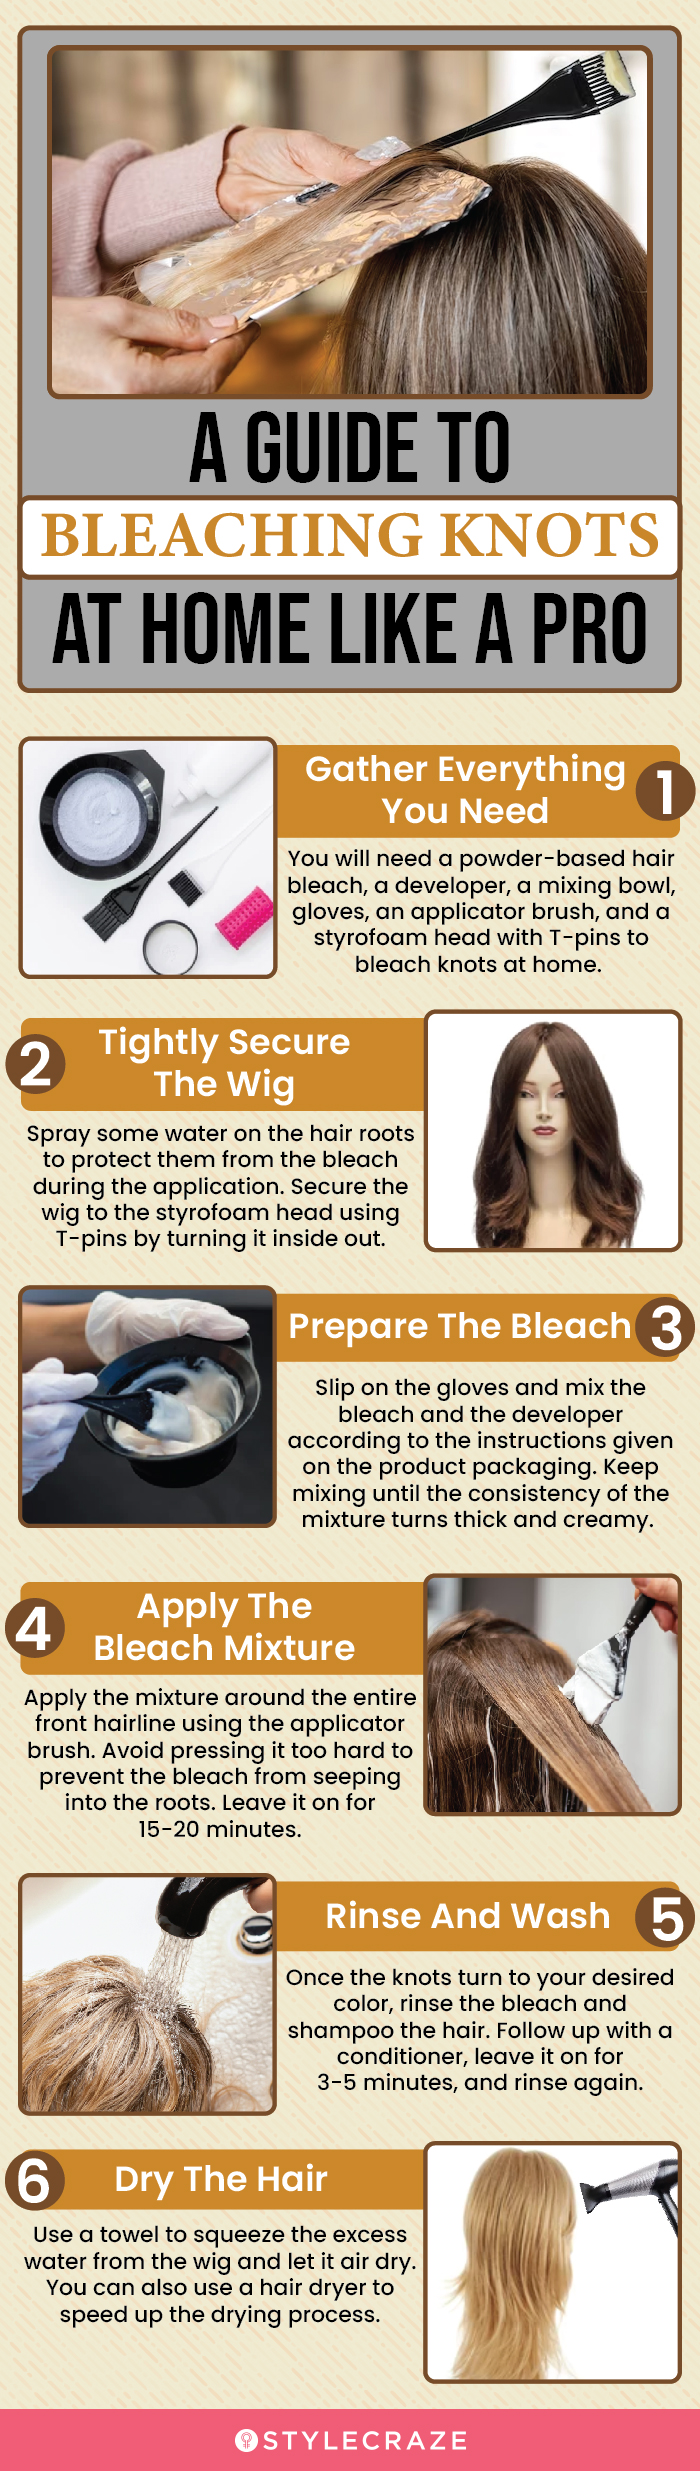 a guide to bleaching knots at home like a pro (infographic)